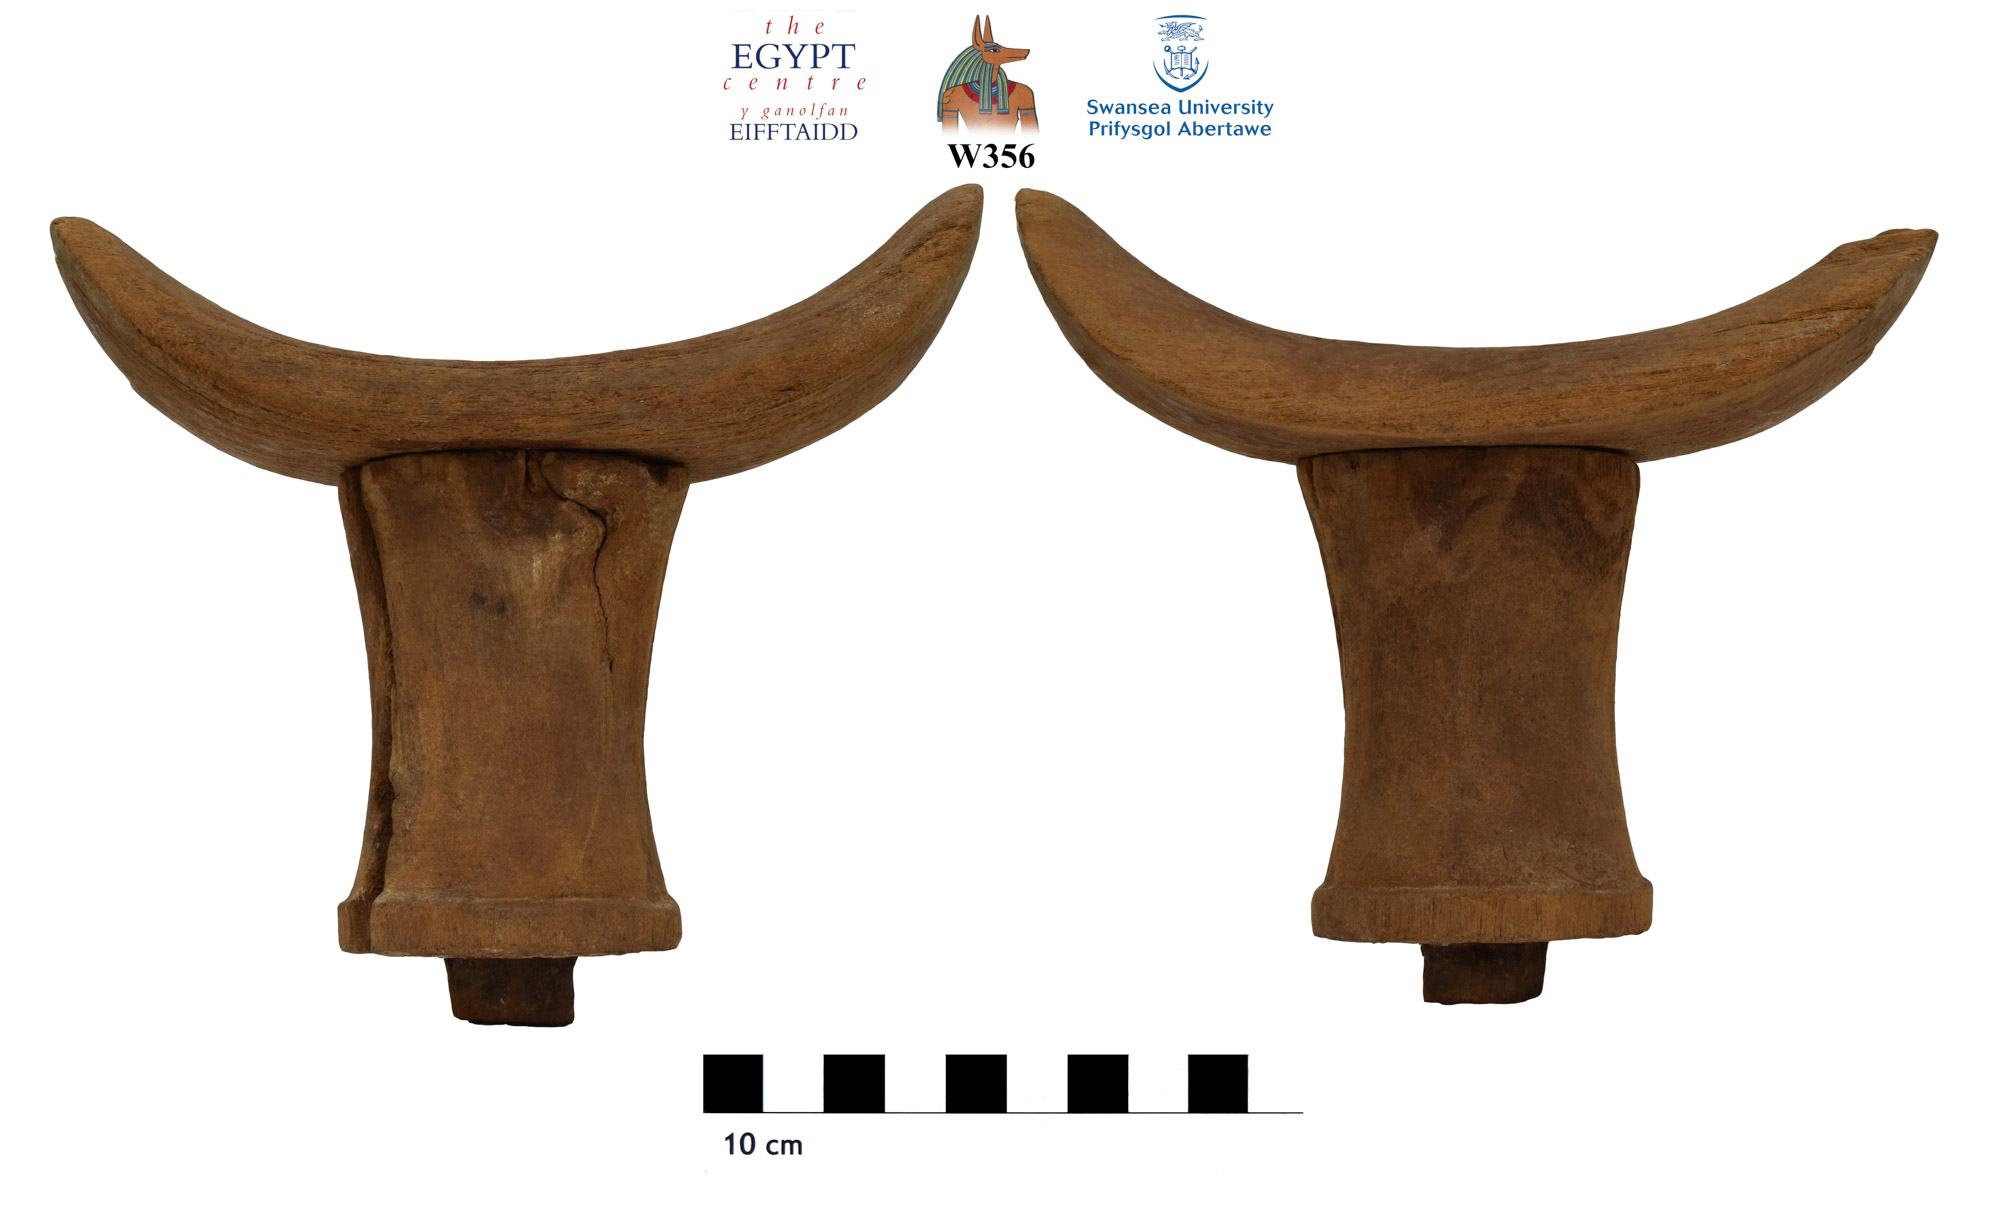 Image for: Fragment of a headrest